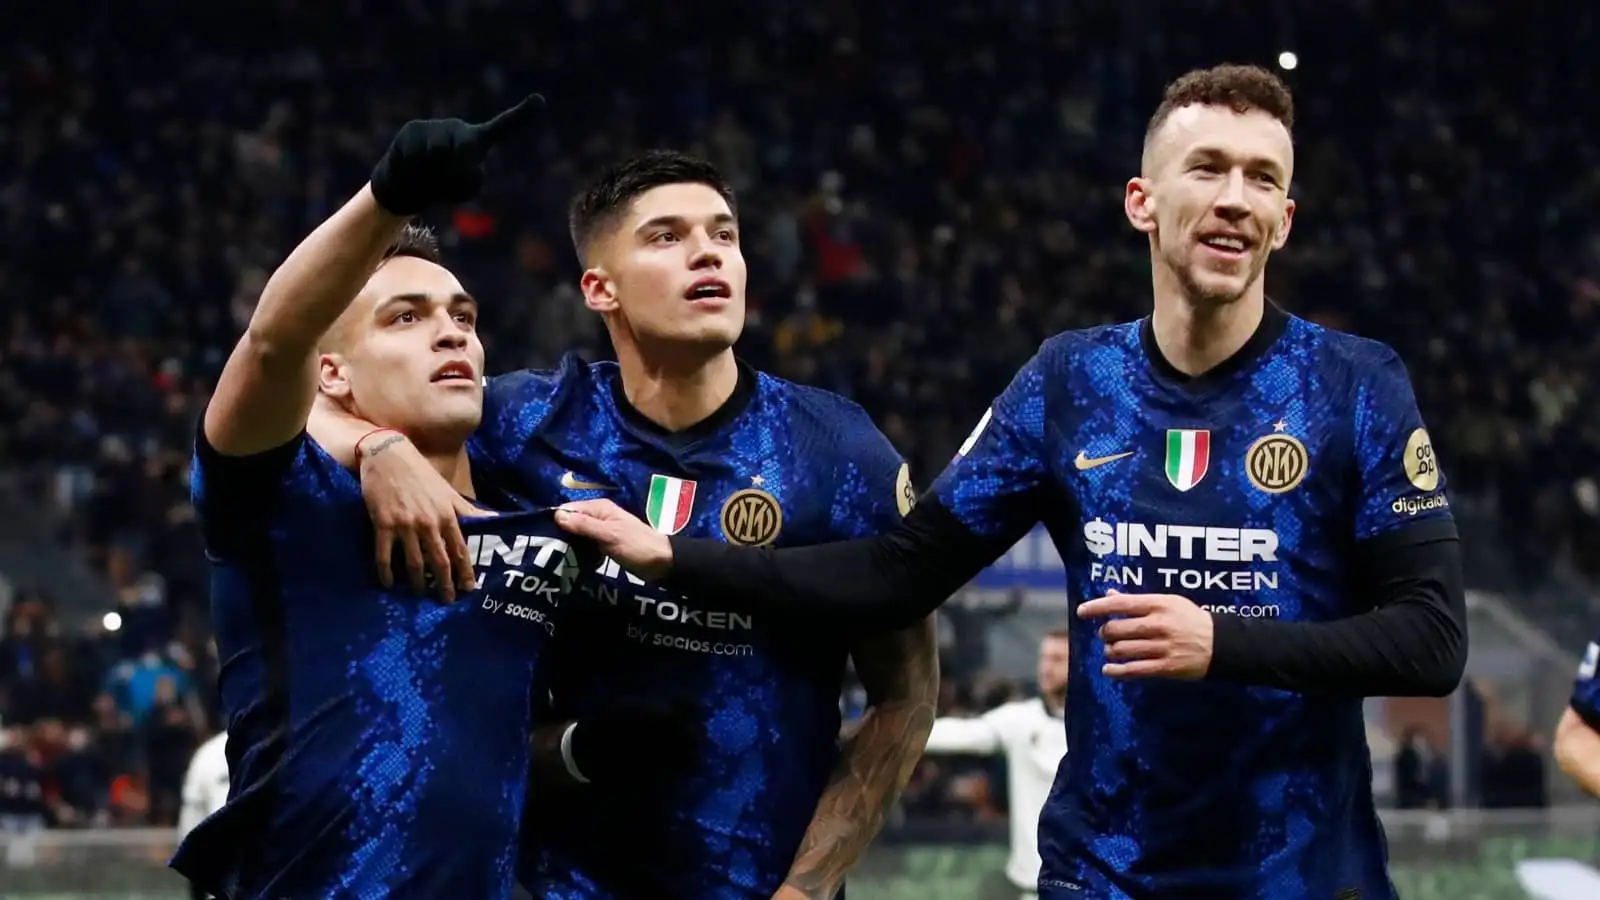 Man Utd open dialogue with Inter Milan after top-class performance puts star ‘back in fashion’ for big clubs